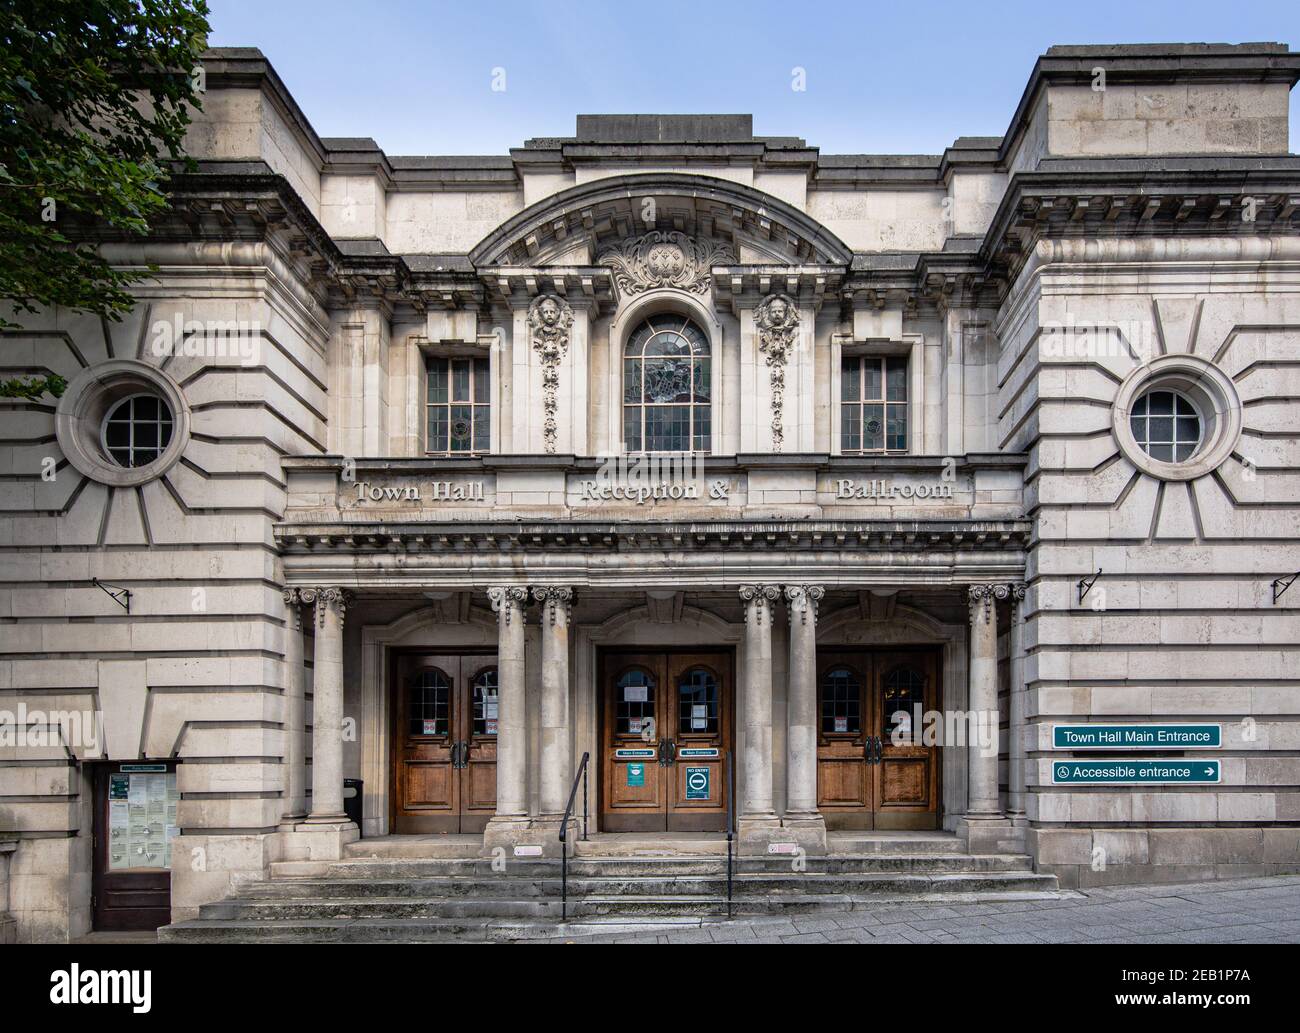 Entrance/Reception for Stockport Town Hall / Ballroom.  The architecture is English Baroque.  Stockport, England, Uk Stock Photo